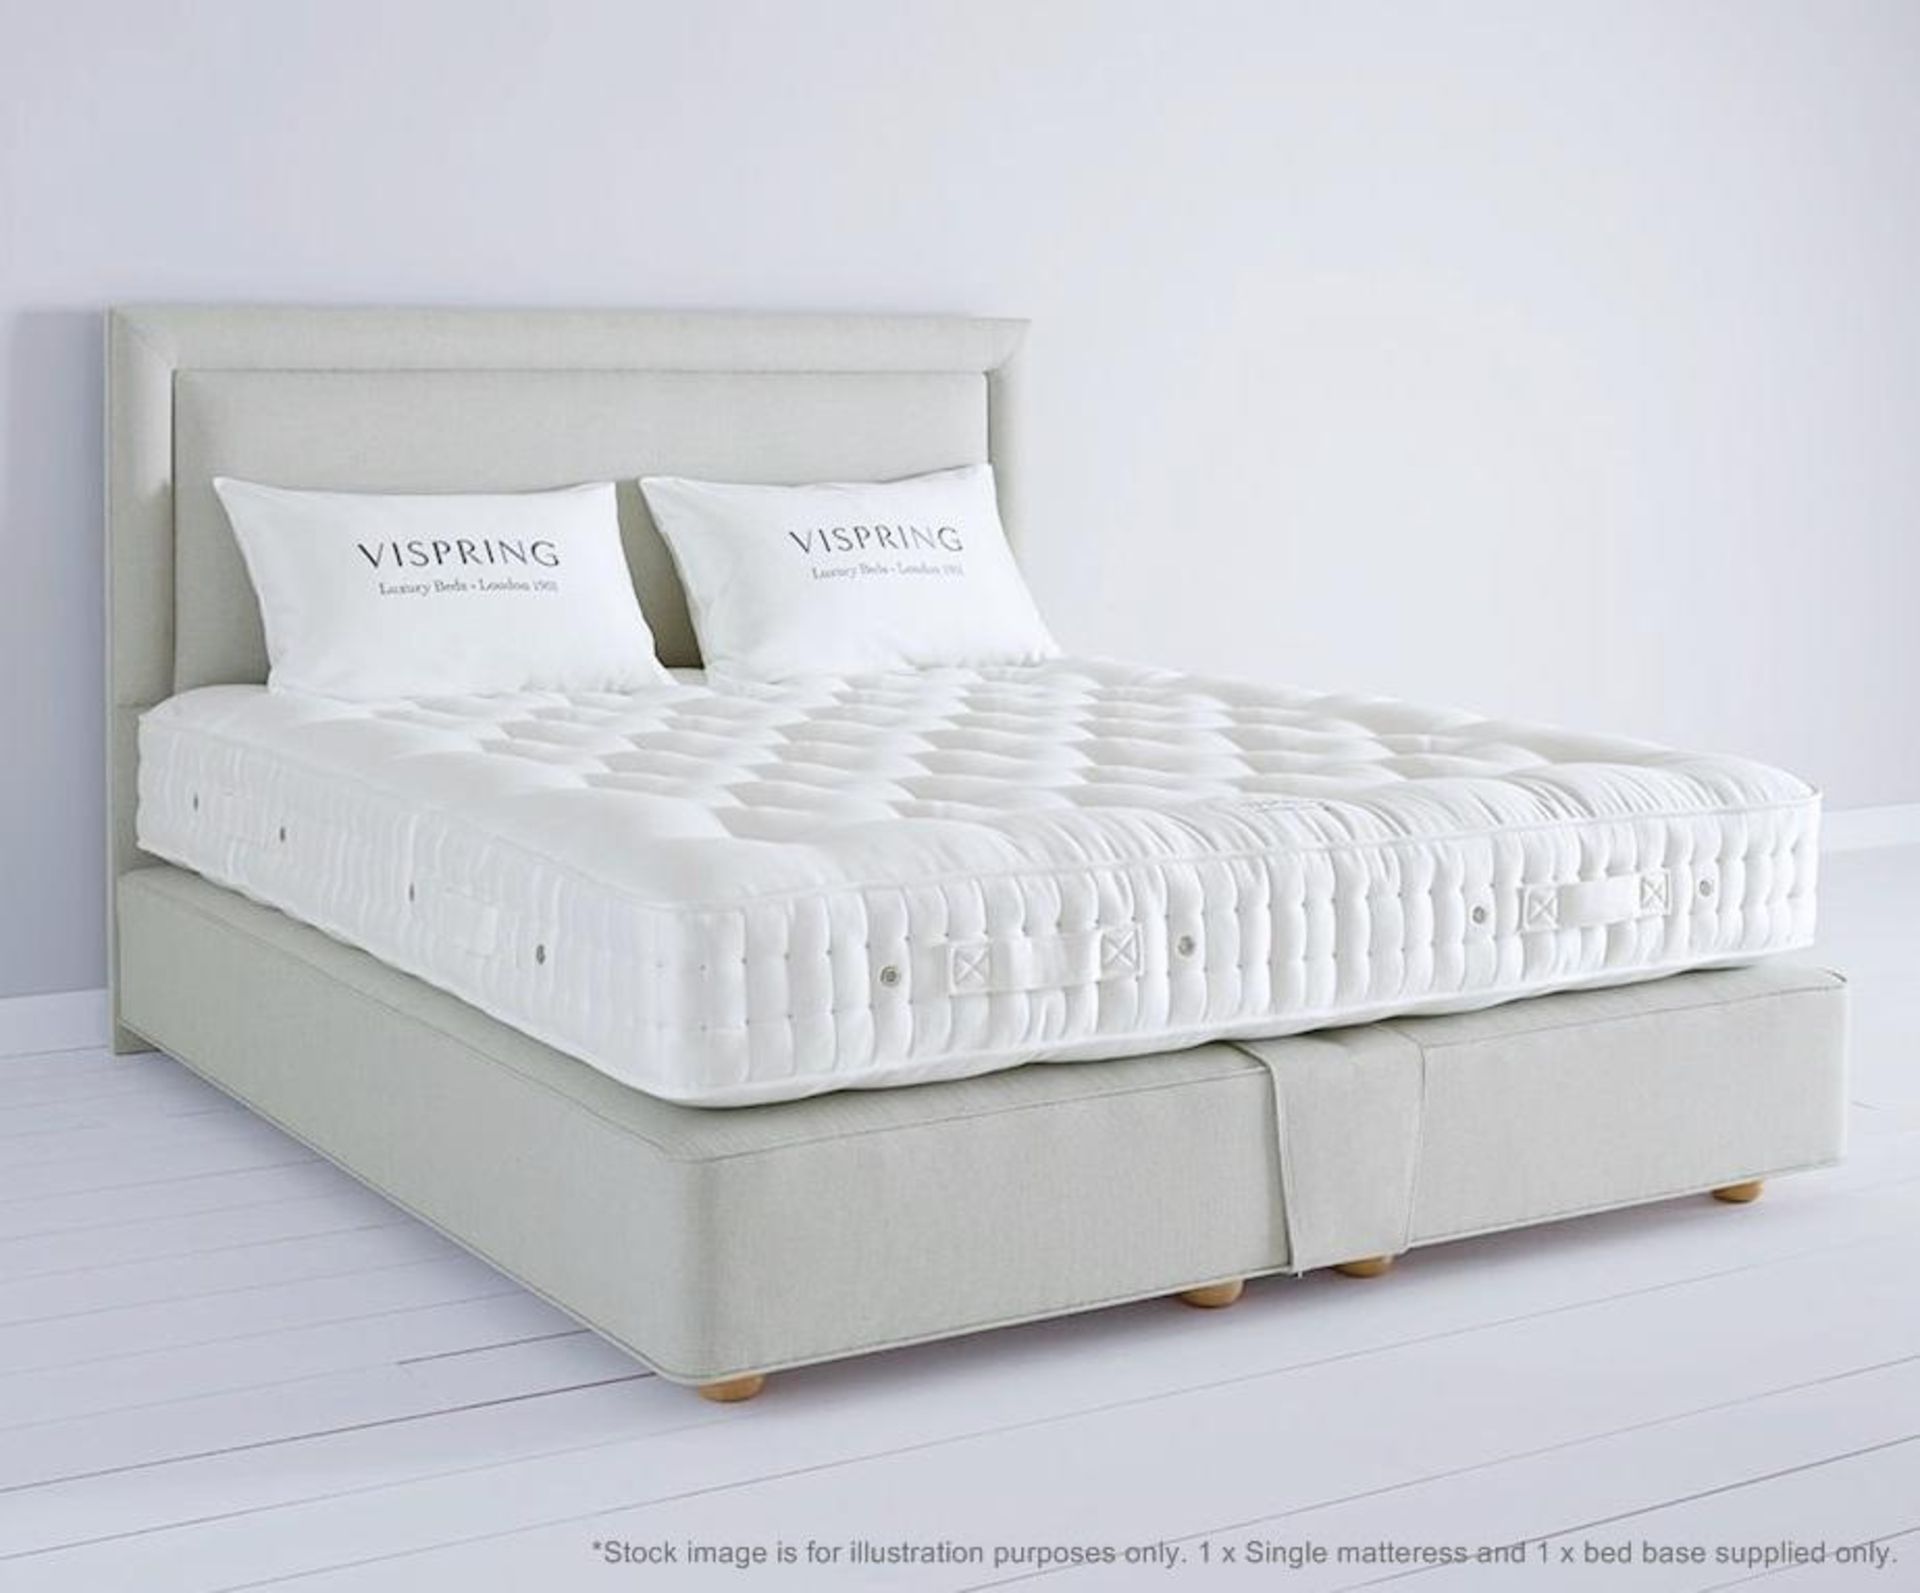 1 x VISPRING 'Baronet Superb' Luxury Single Mattress With Deluxe Bed Base - Handmade By British Craf